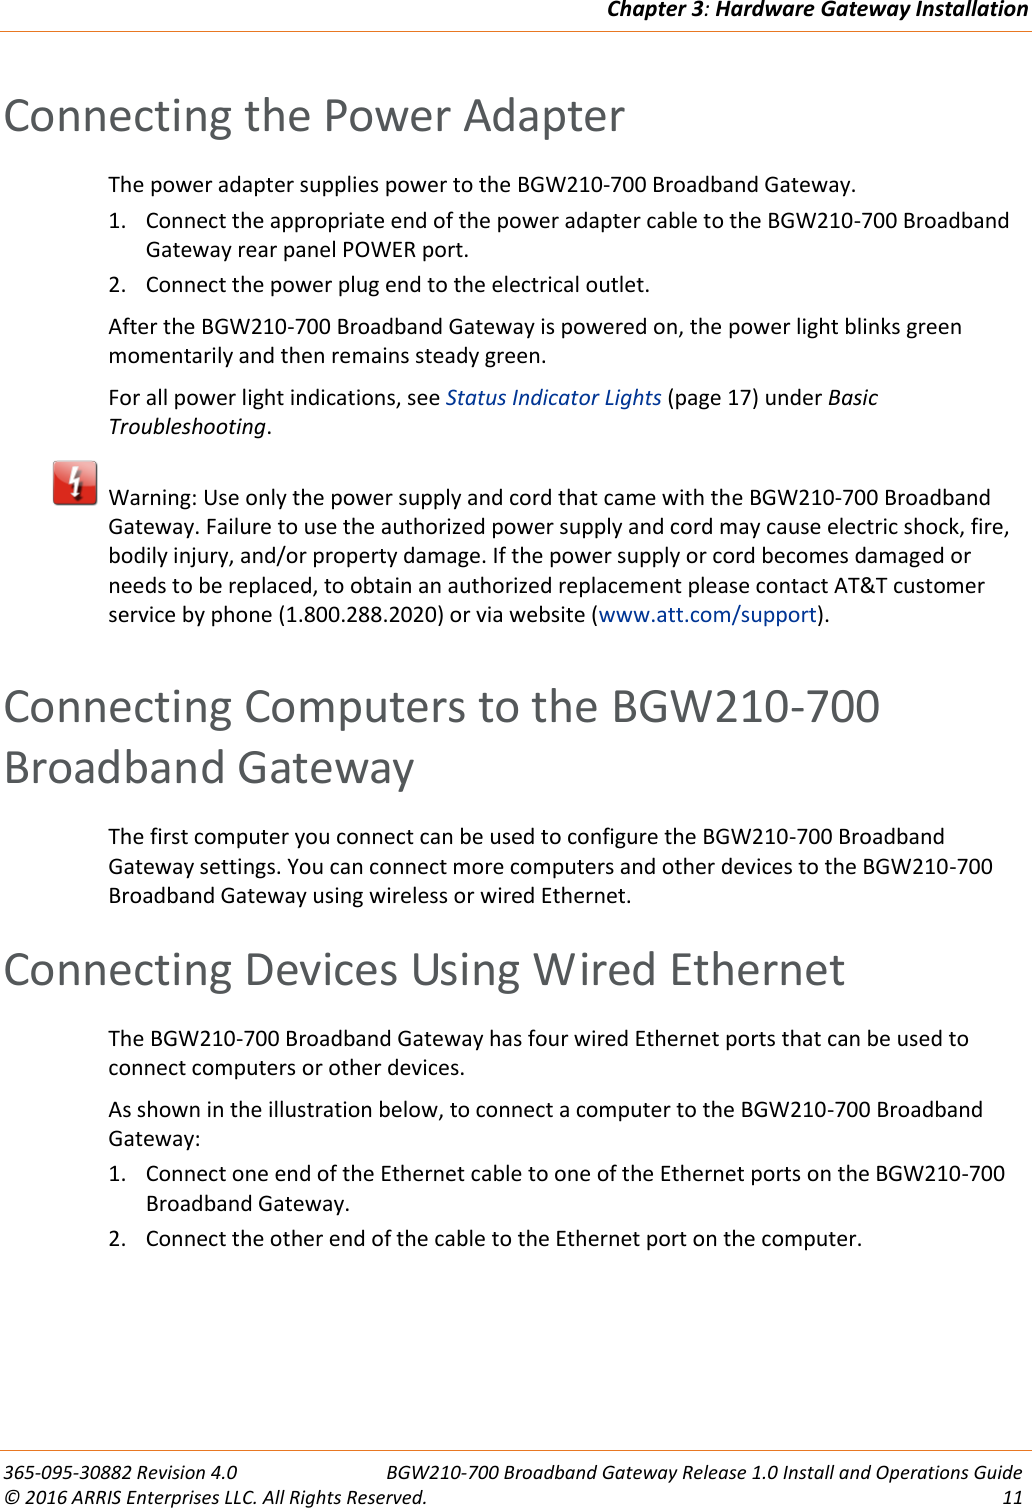 Chapter 3: Hardware Gateway Installation  365-095-30882 Revision 4.0  BGW210-700 Broadband Gateway Release 1.0 Install and Operations Guide © 2016 ARRIS Enterprises LLC. All Rights Reserved.  11  Connecting the Power Adapter The power adapter supplies power to the BGW210-700 Broadband Gateway.  1. Connect the appropriate end of the power adapter cable to the BGW210-700 Broadband Gateway rear panel POWER port. 2. Connect the power plug end to the electrical outlet. After the BGW210-700 Broadband Gateway is powered on, the power light blinks green momentarily and then remains steady green. For all power light indications, see Status Indicator Lights (page 17) under Basic Troubleshooting.     Warning: Use only the power supply and cord that came with the BGW210-700 Broadband Gateway. Failure to use the authorized power supply and cord may cause electric shock, fire, bodily injury, and/or property damage. If the power supply or cord becomes damaged or needs to be replaced, to obtain an authorized replacement please contact AT&amp;T customer service by phone (1.800.288.2020) or via website (www.att.com/support).   Connecting Computers to the BGW210-700  Broadband Gateway The first computer you connect can be used to configure the BGW210-700 Broadband Gateway settings. You can connect more computers and other devices to the BGW210-700 Broadband Gateway using wireless or wired Ethernet.   Connecting Devices Using Wired Ethernet The BGW210-700 Broadband Gateway has four wired Ethernet ports that can be used to connect computers or other devices.  As shown in the illustration below, to connect a computer to the BGW210-700 Broadband Gateway: 1. Connect one end of the Ethernet cable to one of the Ethernet ports on the BGW210-700 Broadband Gateway. 2. Connect the other end of the cable to the Ethernet port on the computer. 